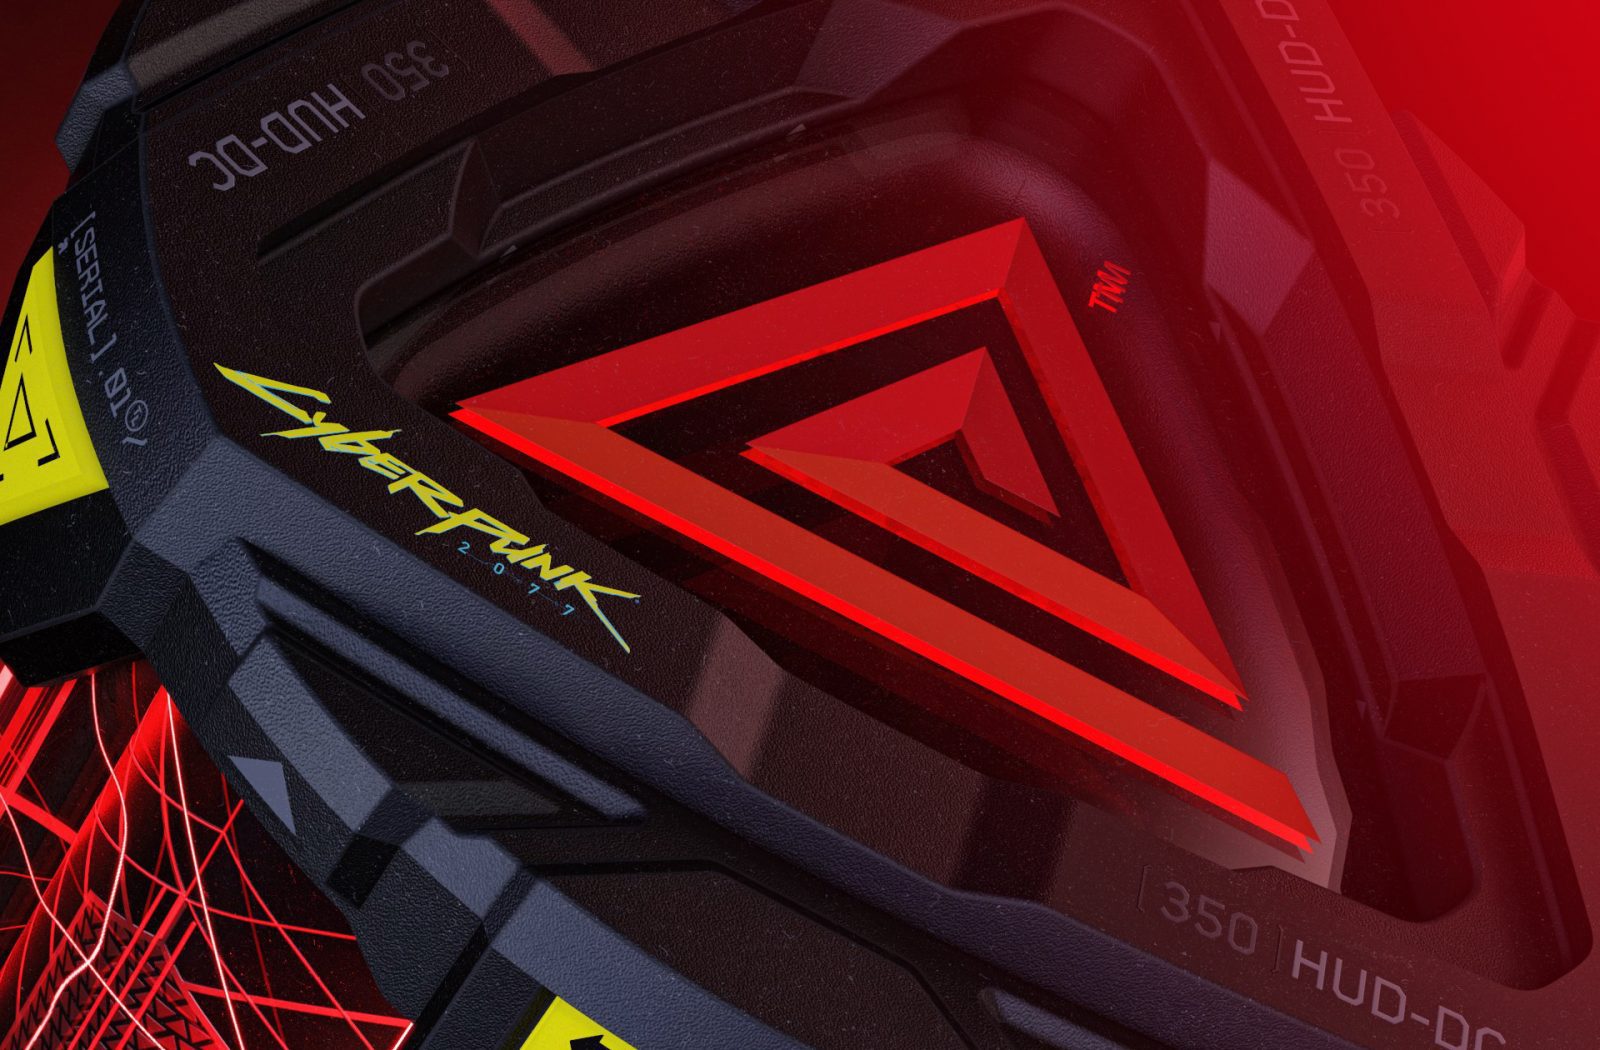 Close-up shot of a fuel cell themed influencer unboxing experience promoting Cyberpunk 2077 and Doritos.